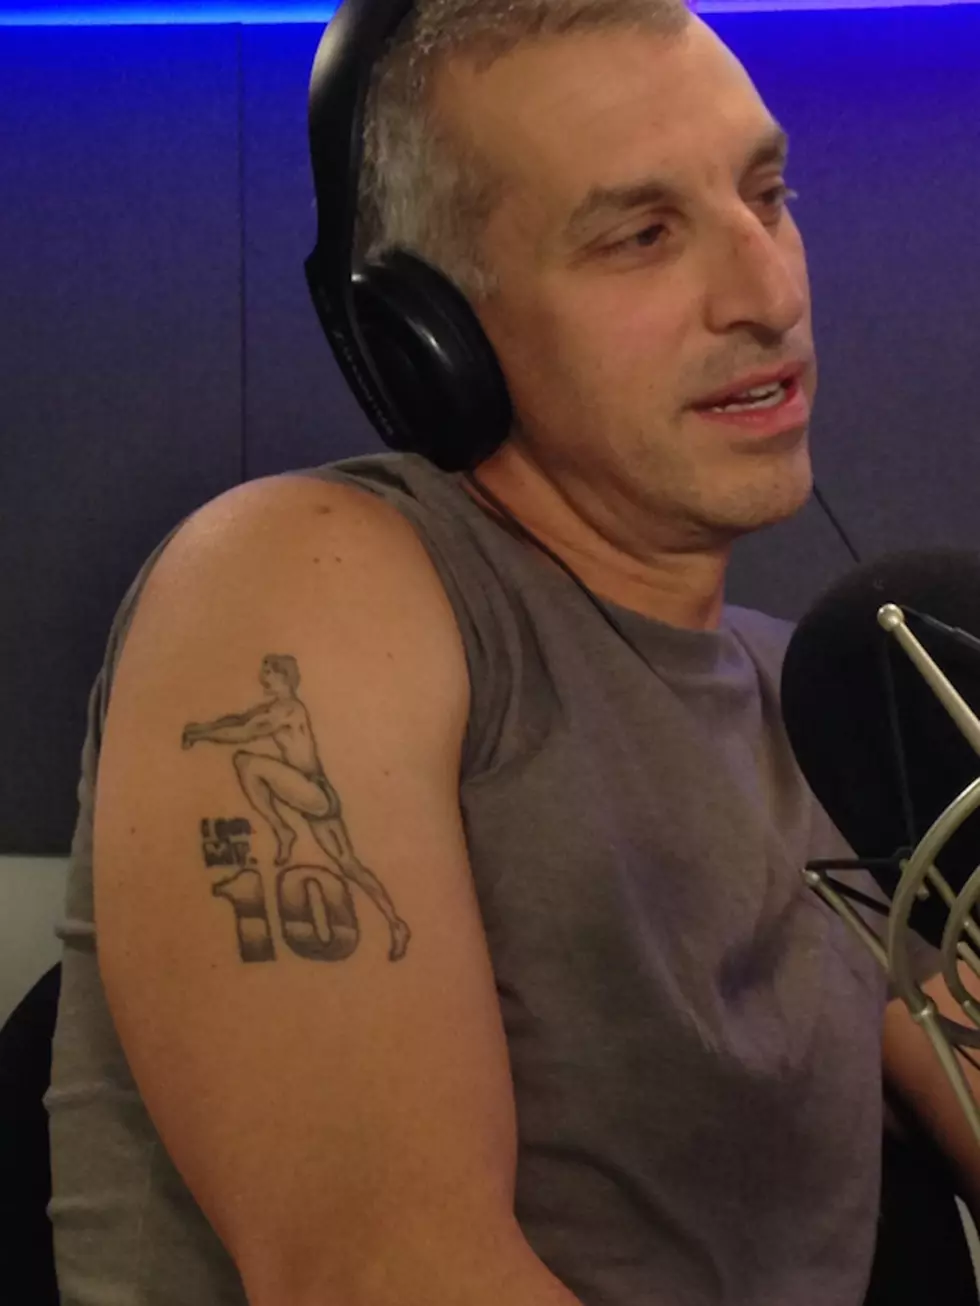 We Remember How Ridiculous Zane’s Tattoo Is [Photo]